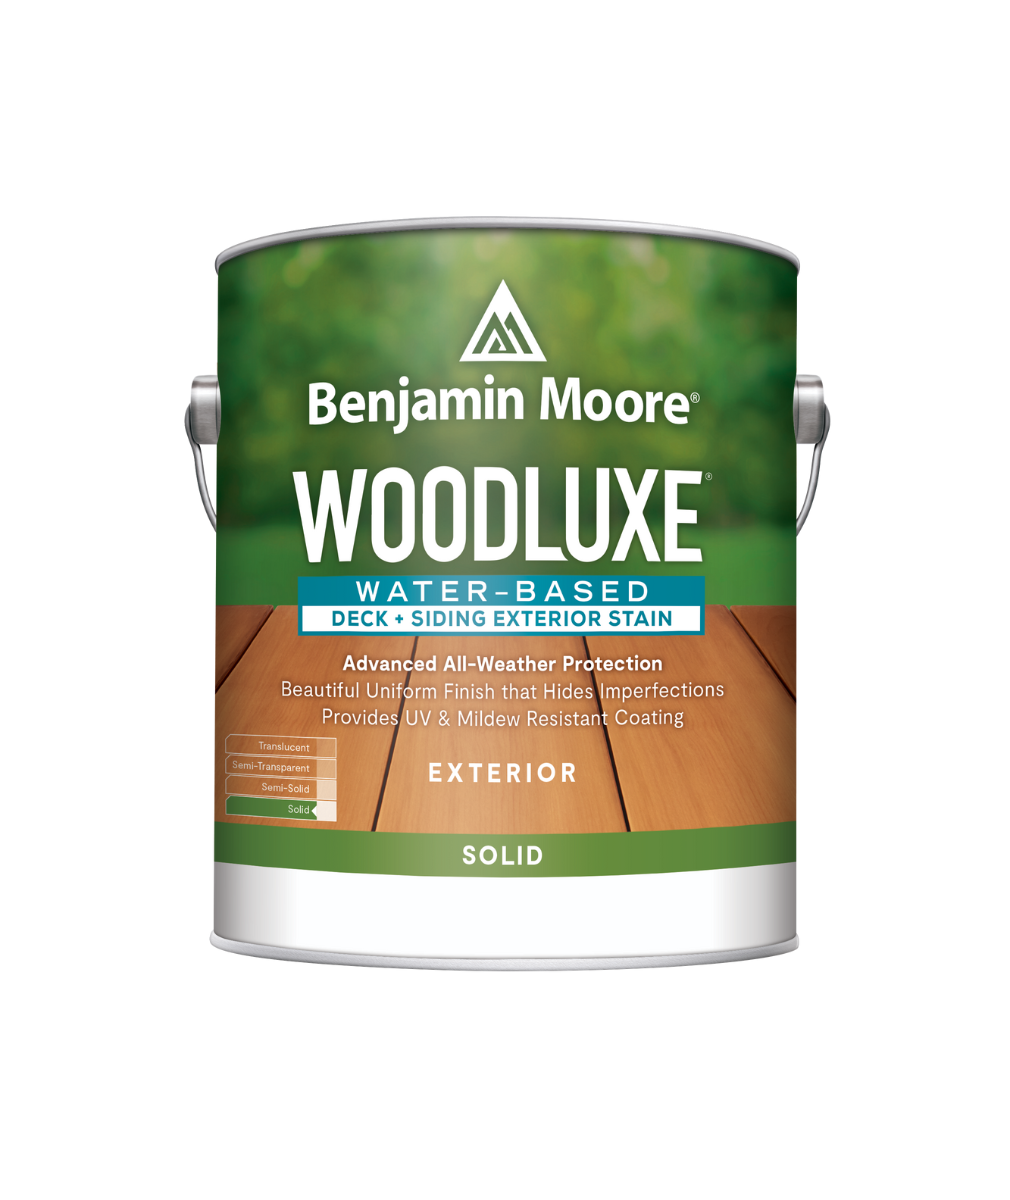 Exterior Wood Stains & Finishes